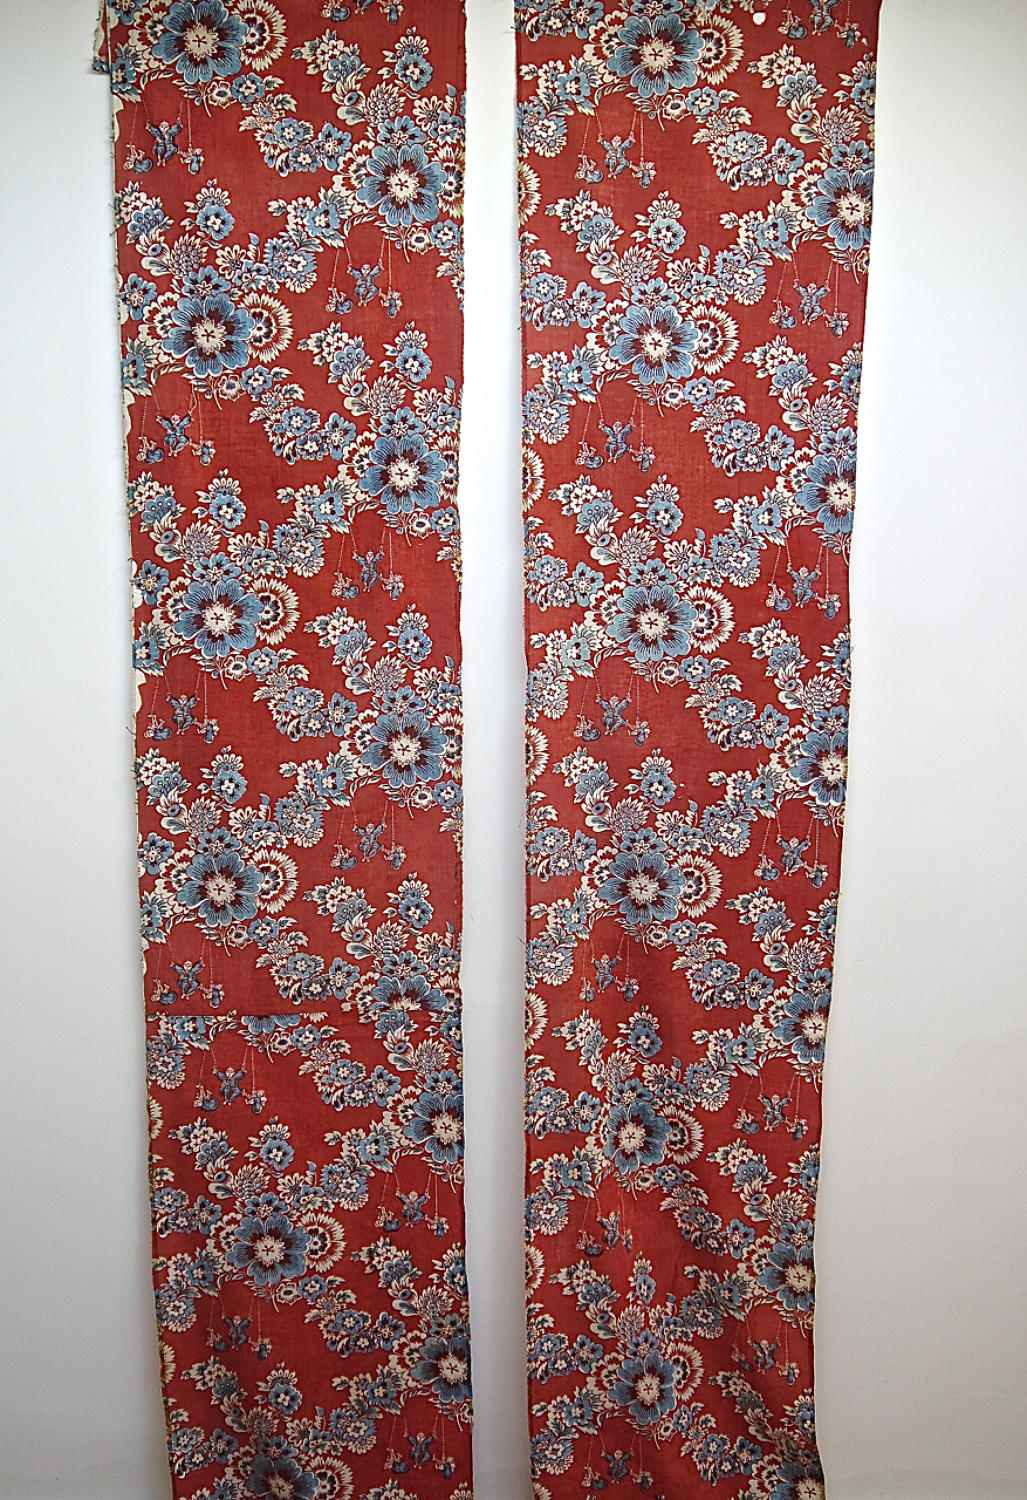 Pair of 18th century French Chinoiserie Panels